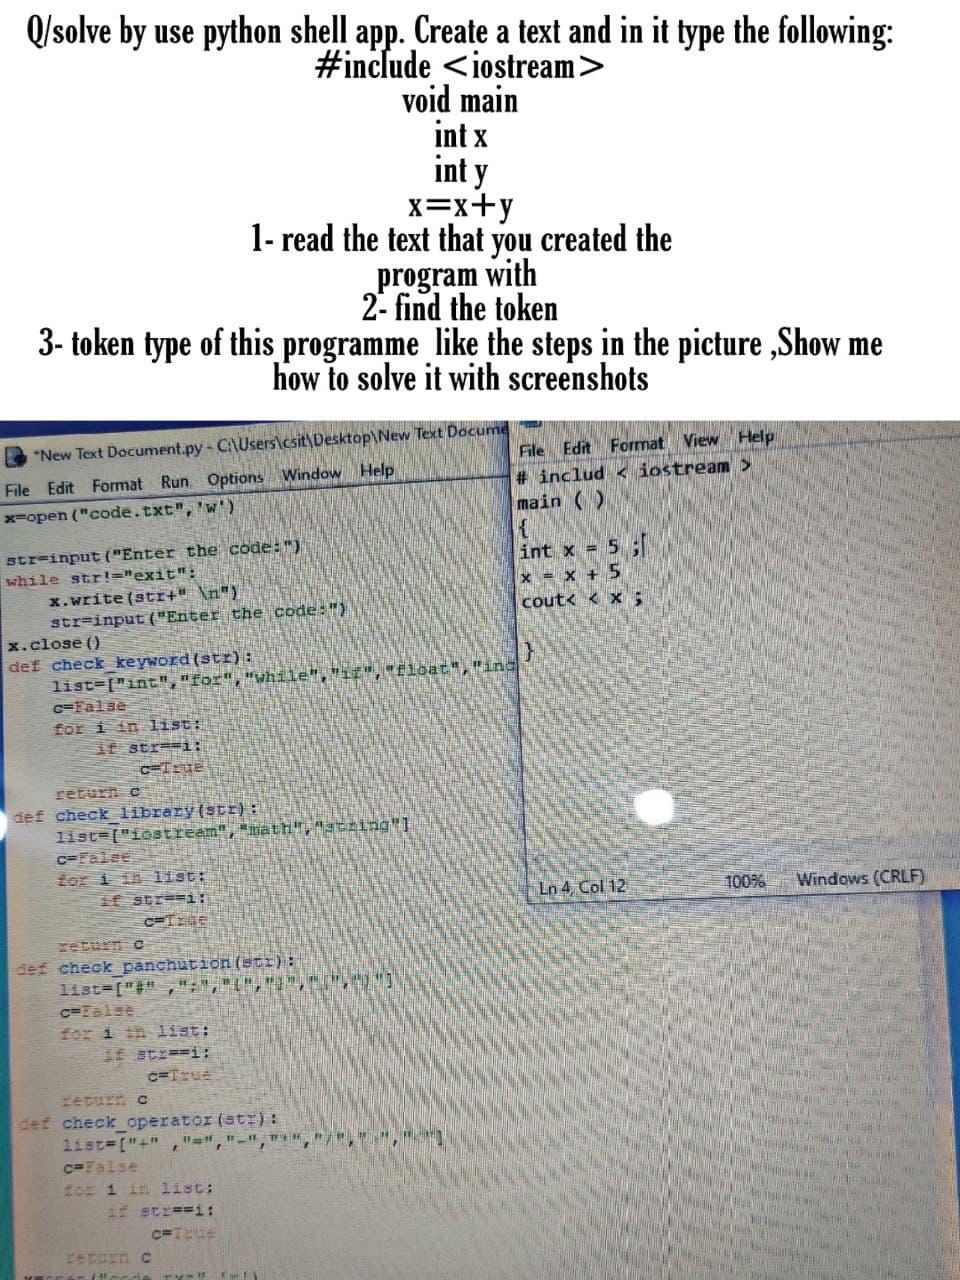 Q/solve by use python shell app. Create a text and in it type the following:
#include <iostream>
void main
int x
int y
x=x+y
1- read the text that you created the
with
program
2- find the token
3- token type of this programme like the steps in the picture ,Show me
how to solve it with screenshots
File Edit Format View Help
# includ < iostream >
main ()
*New Text Document.py- C\Users\csit\Desktop\New Text Docume
File Edit Format Run Options Window Help
x-open ("code.txt", 'w)
str=input ("Enter the code: ")
while str!="exit":
int x = 5
x = x + 5
cout< < x;
x.write (str+" \n")
str=input ("Enter the code:")
x.close ()
def check keyword (str):
list=["int","for","while",
G=False
E Eloat","ing
for i in list:
if str-i:
CTrue
return C
def check library(str):
list=["icstream","math","string]
C=False
for i in list:
if str==i:
Ln 4 Col 12
100%
Windows (CRLF)
return c
def check panchution (etr) :|
list ["#" ,
c=Ealse
for 1 in list:
if str==i:
Yeturn c
def check operator (stI) :
list ["+"
c=False
Hor 1 in list:
if str==i:
return C
